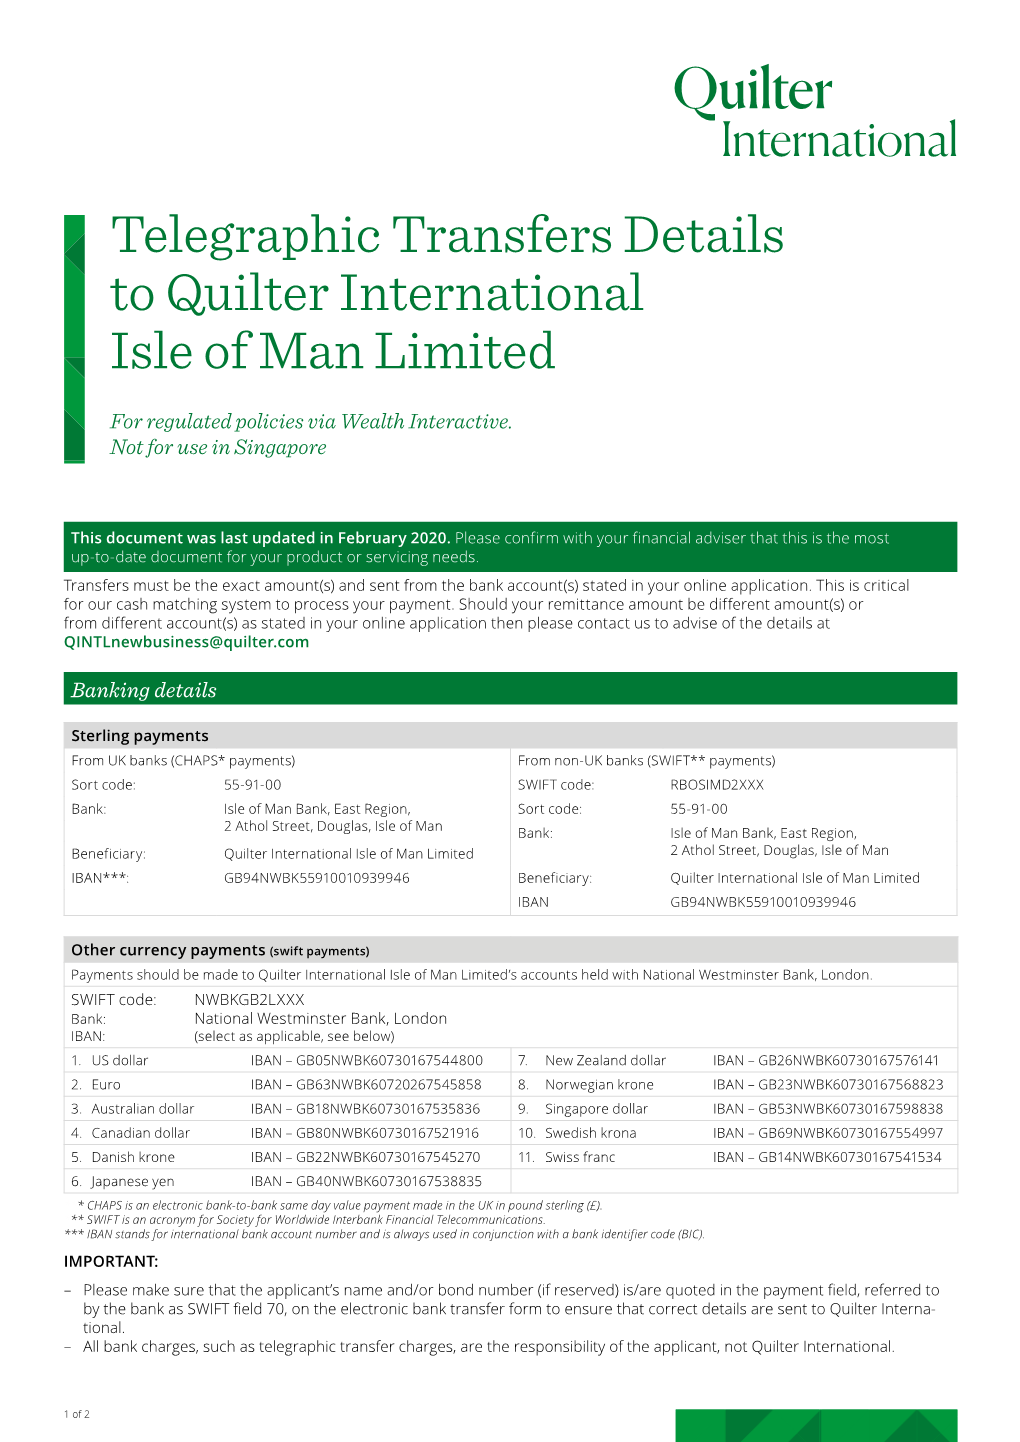 Telegraphic Transfers Details to Quilter International Isle of Man Limited